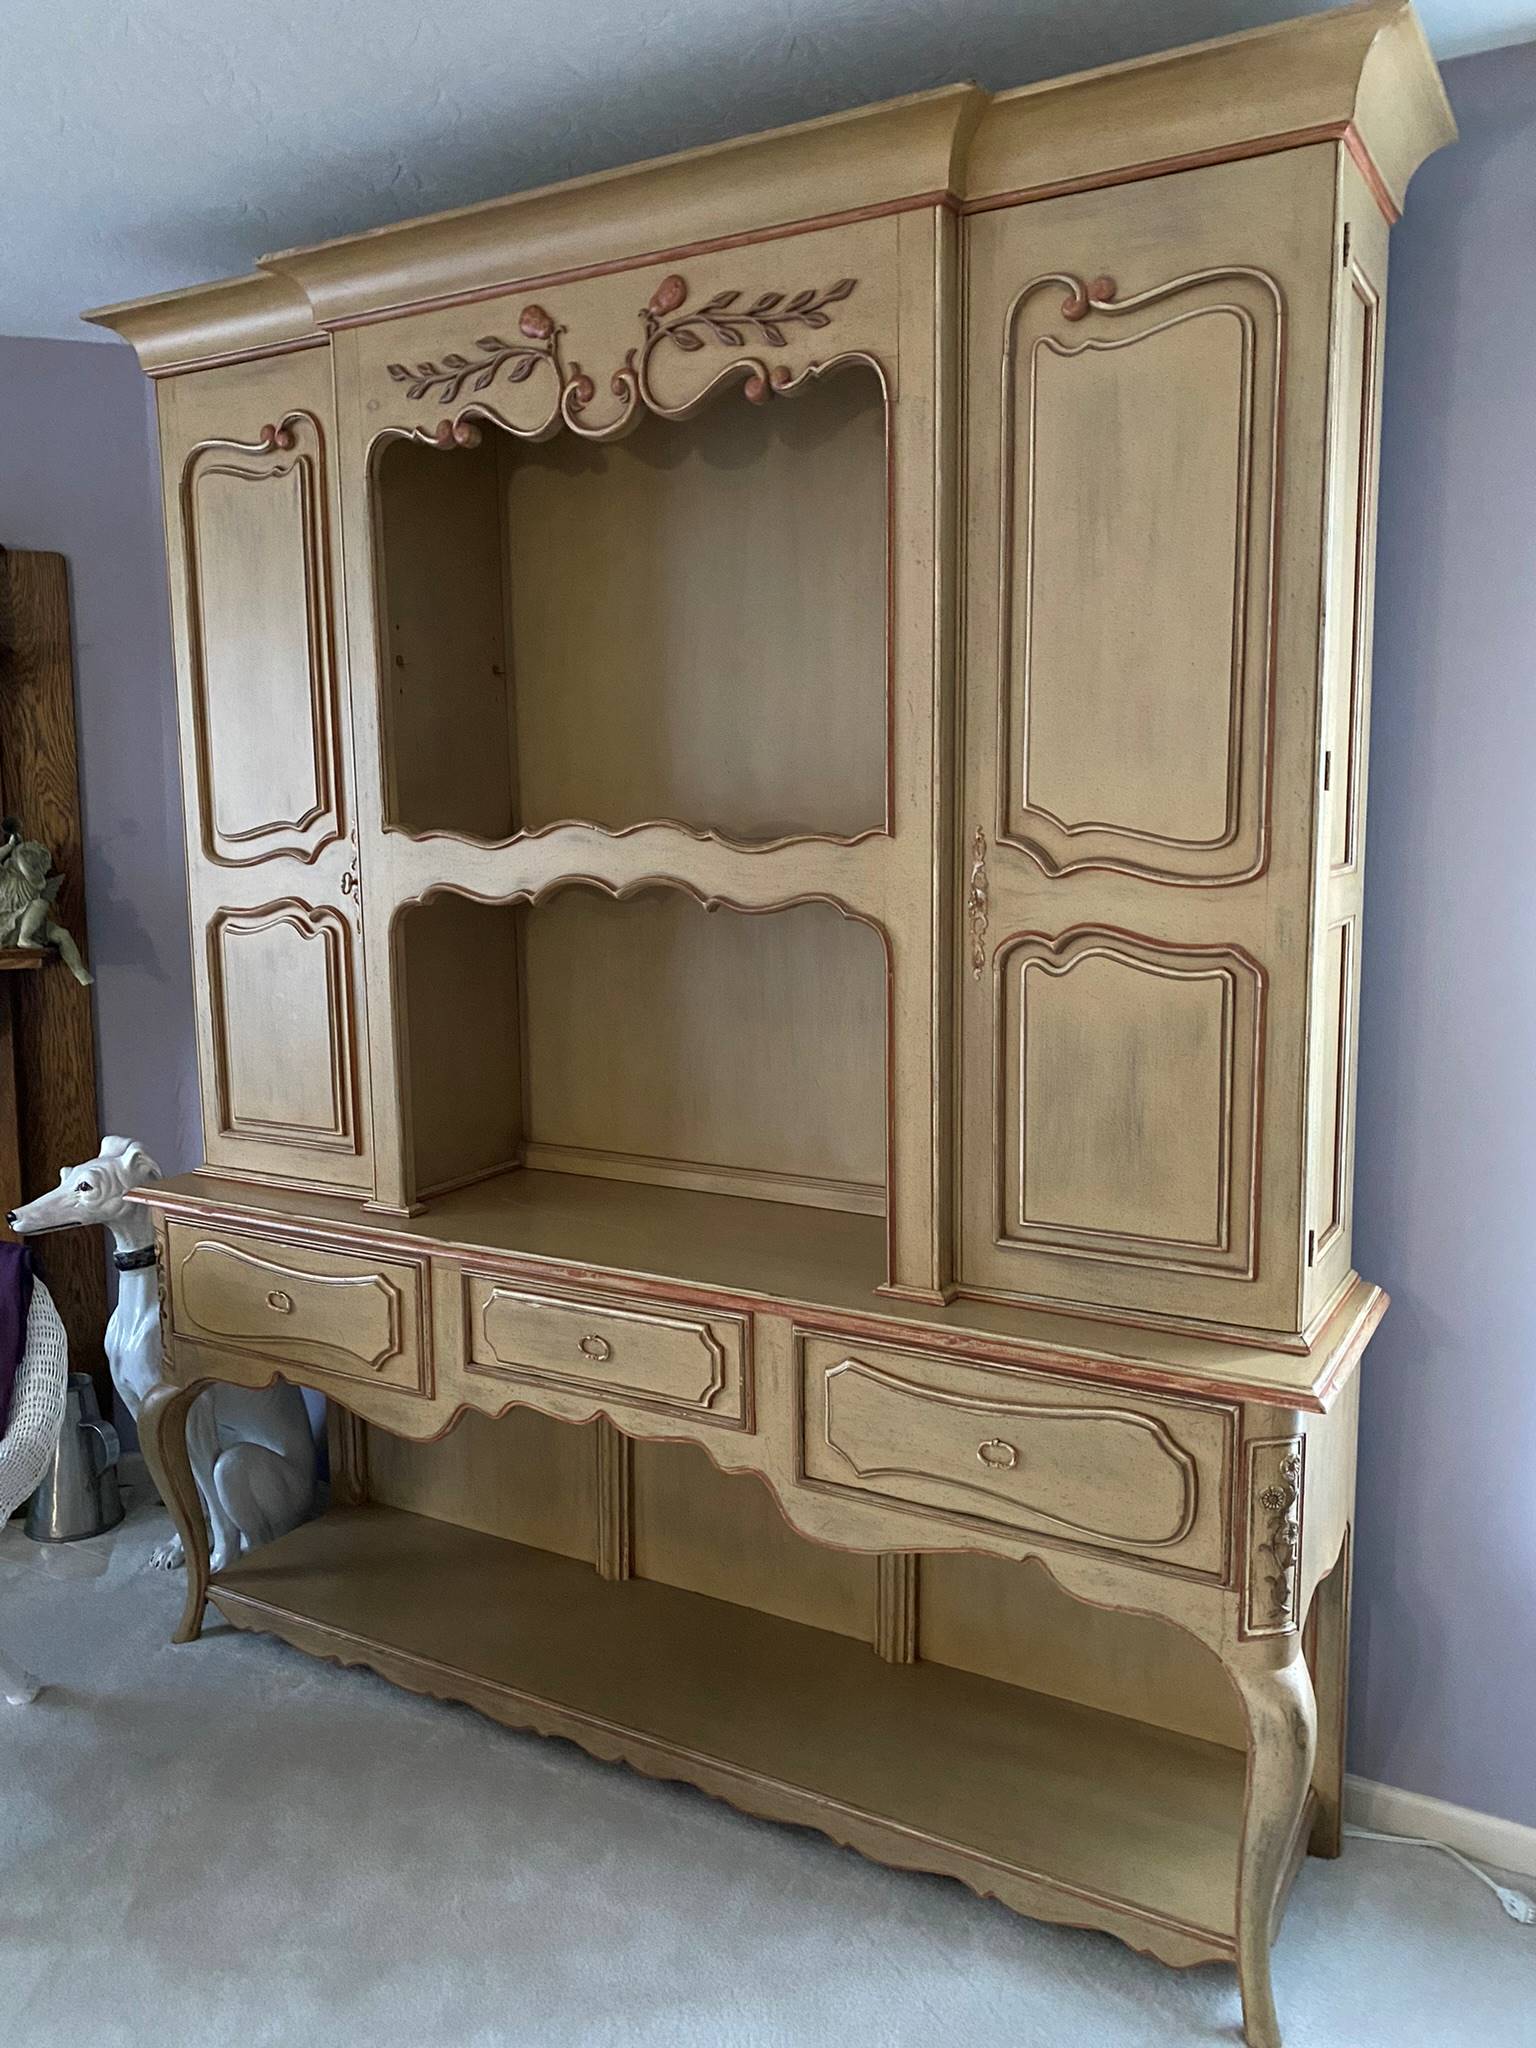 Photo of Hutch Buffet Breakfront Cabinet  French Provincial style 1940-50s  Spectacular   $1399